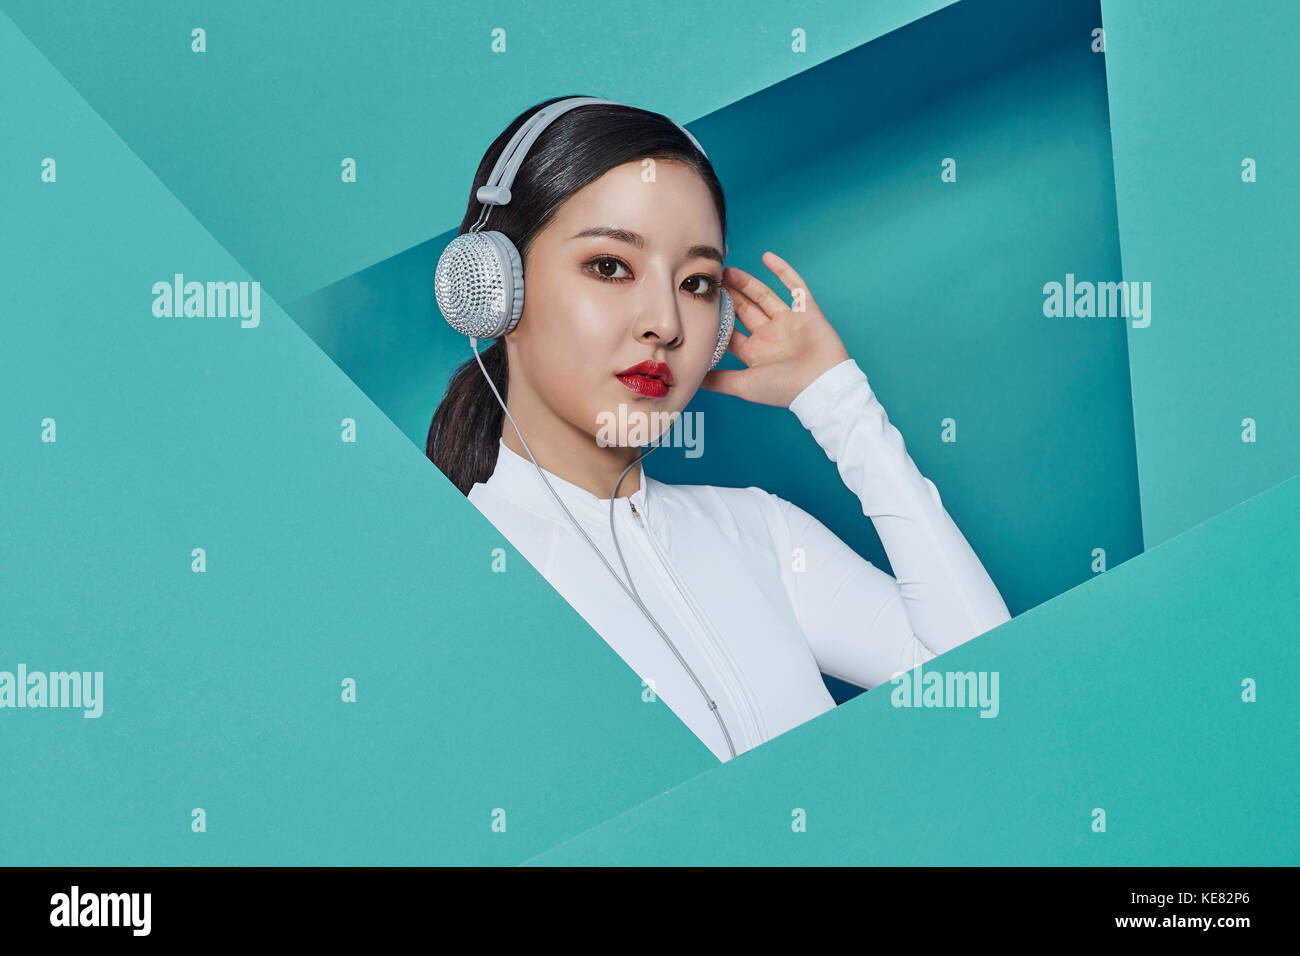 Portrait of young woman listening to music Banque D'Images